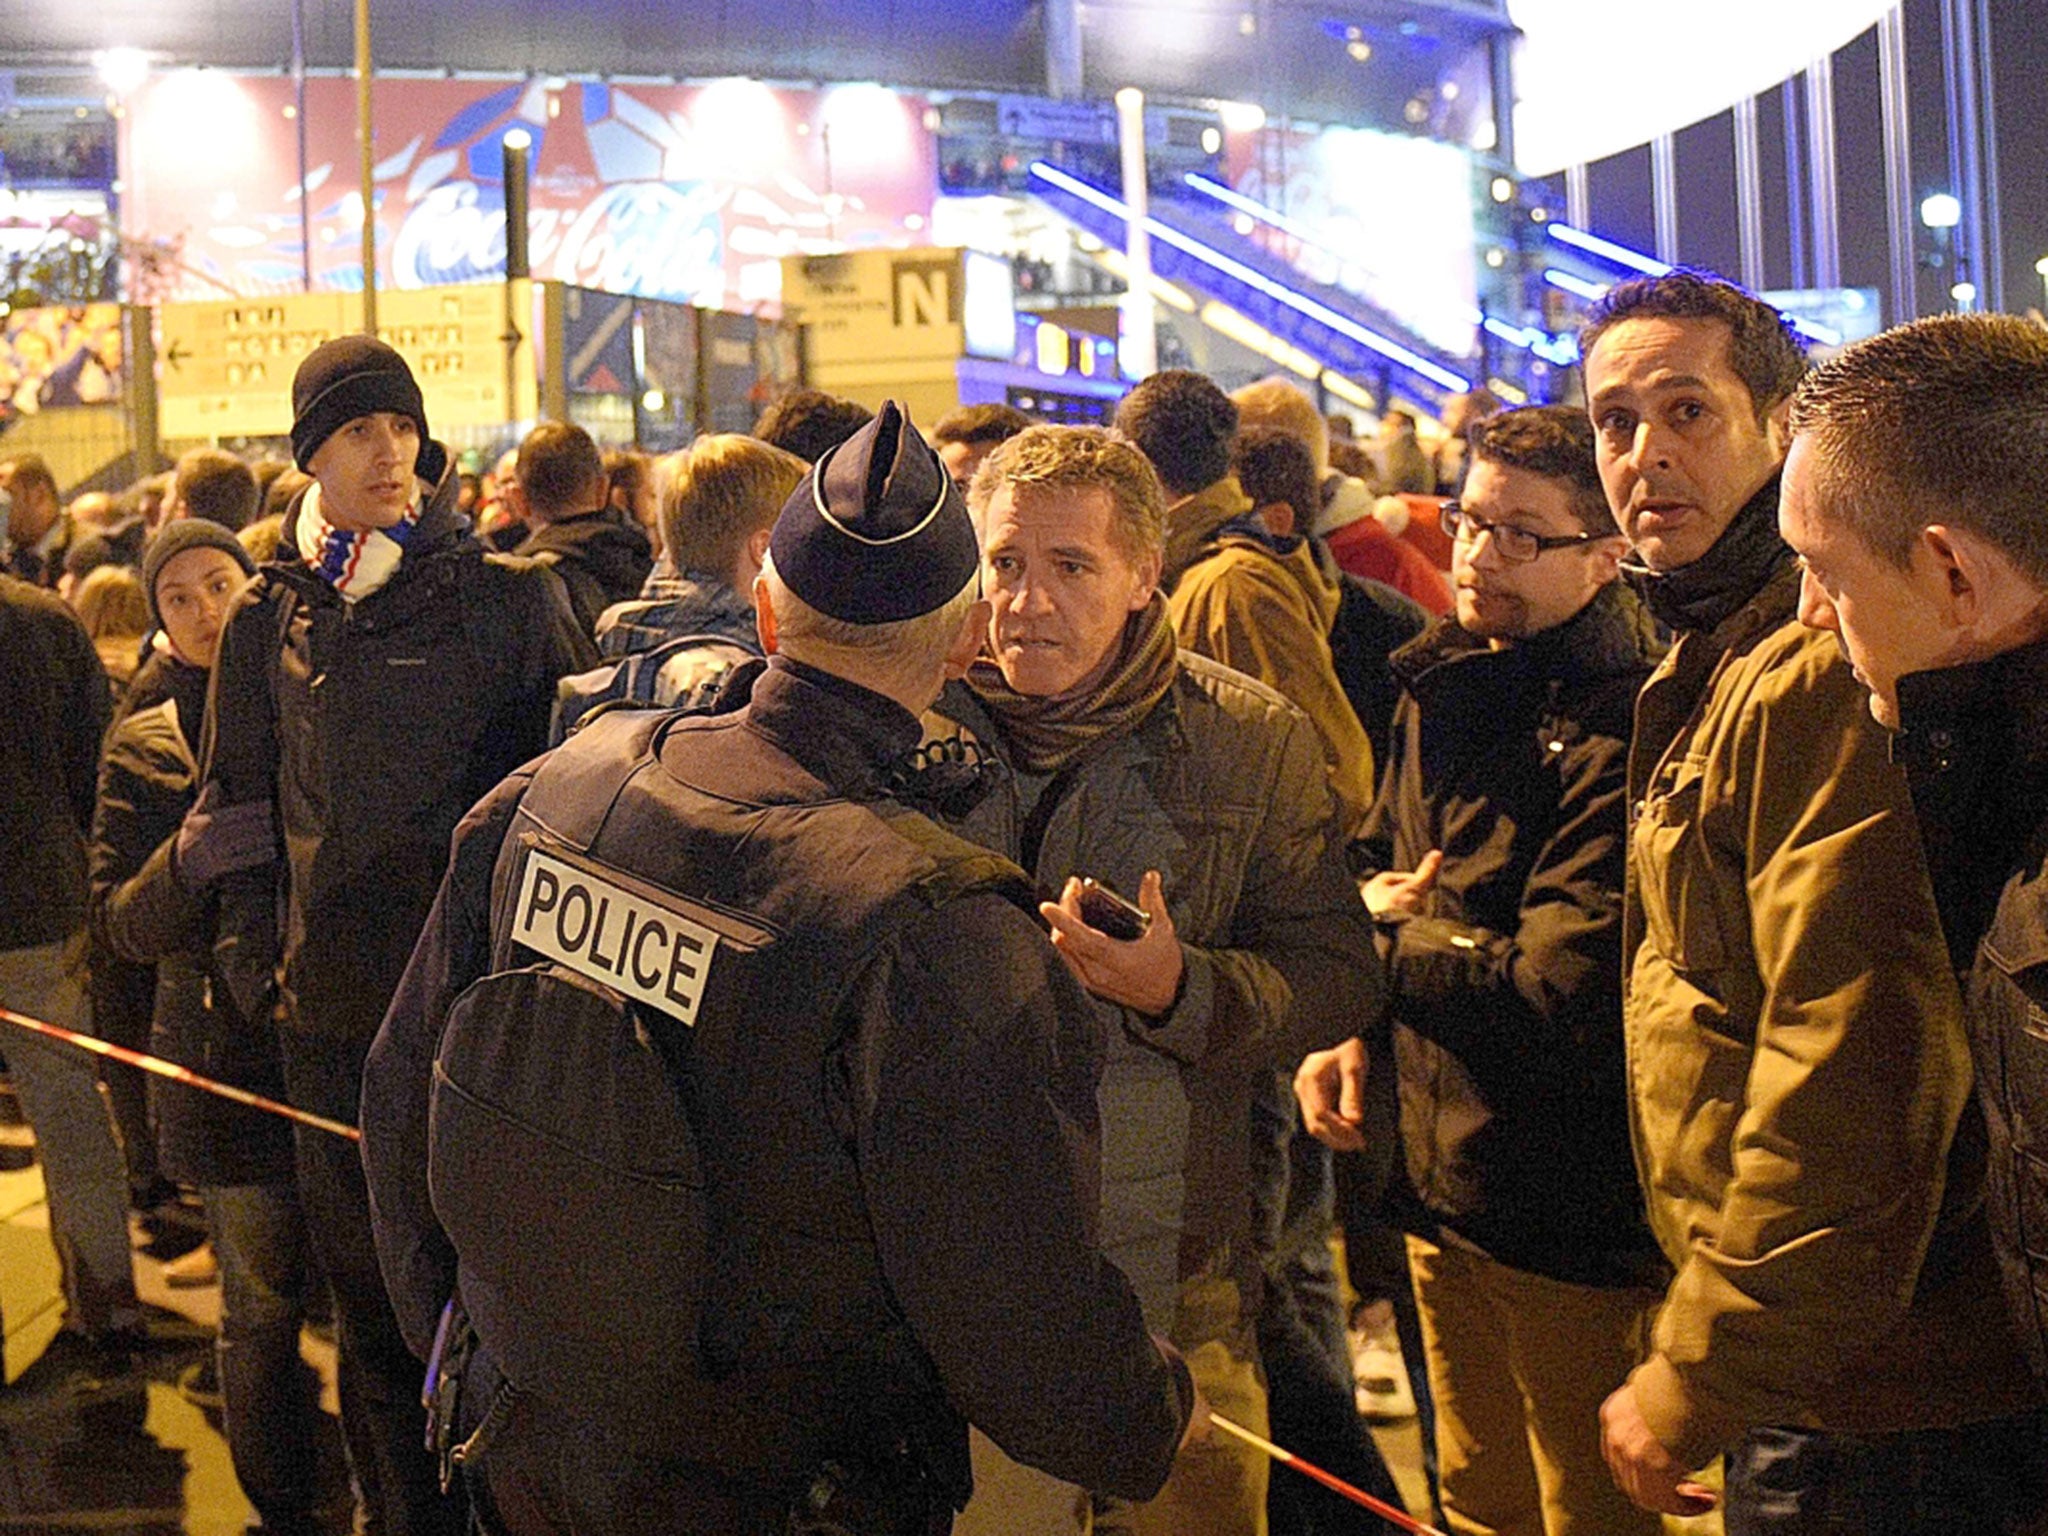 The scene of fear and disbelief after terrorists assaulted a football match in Paris on Friday